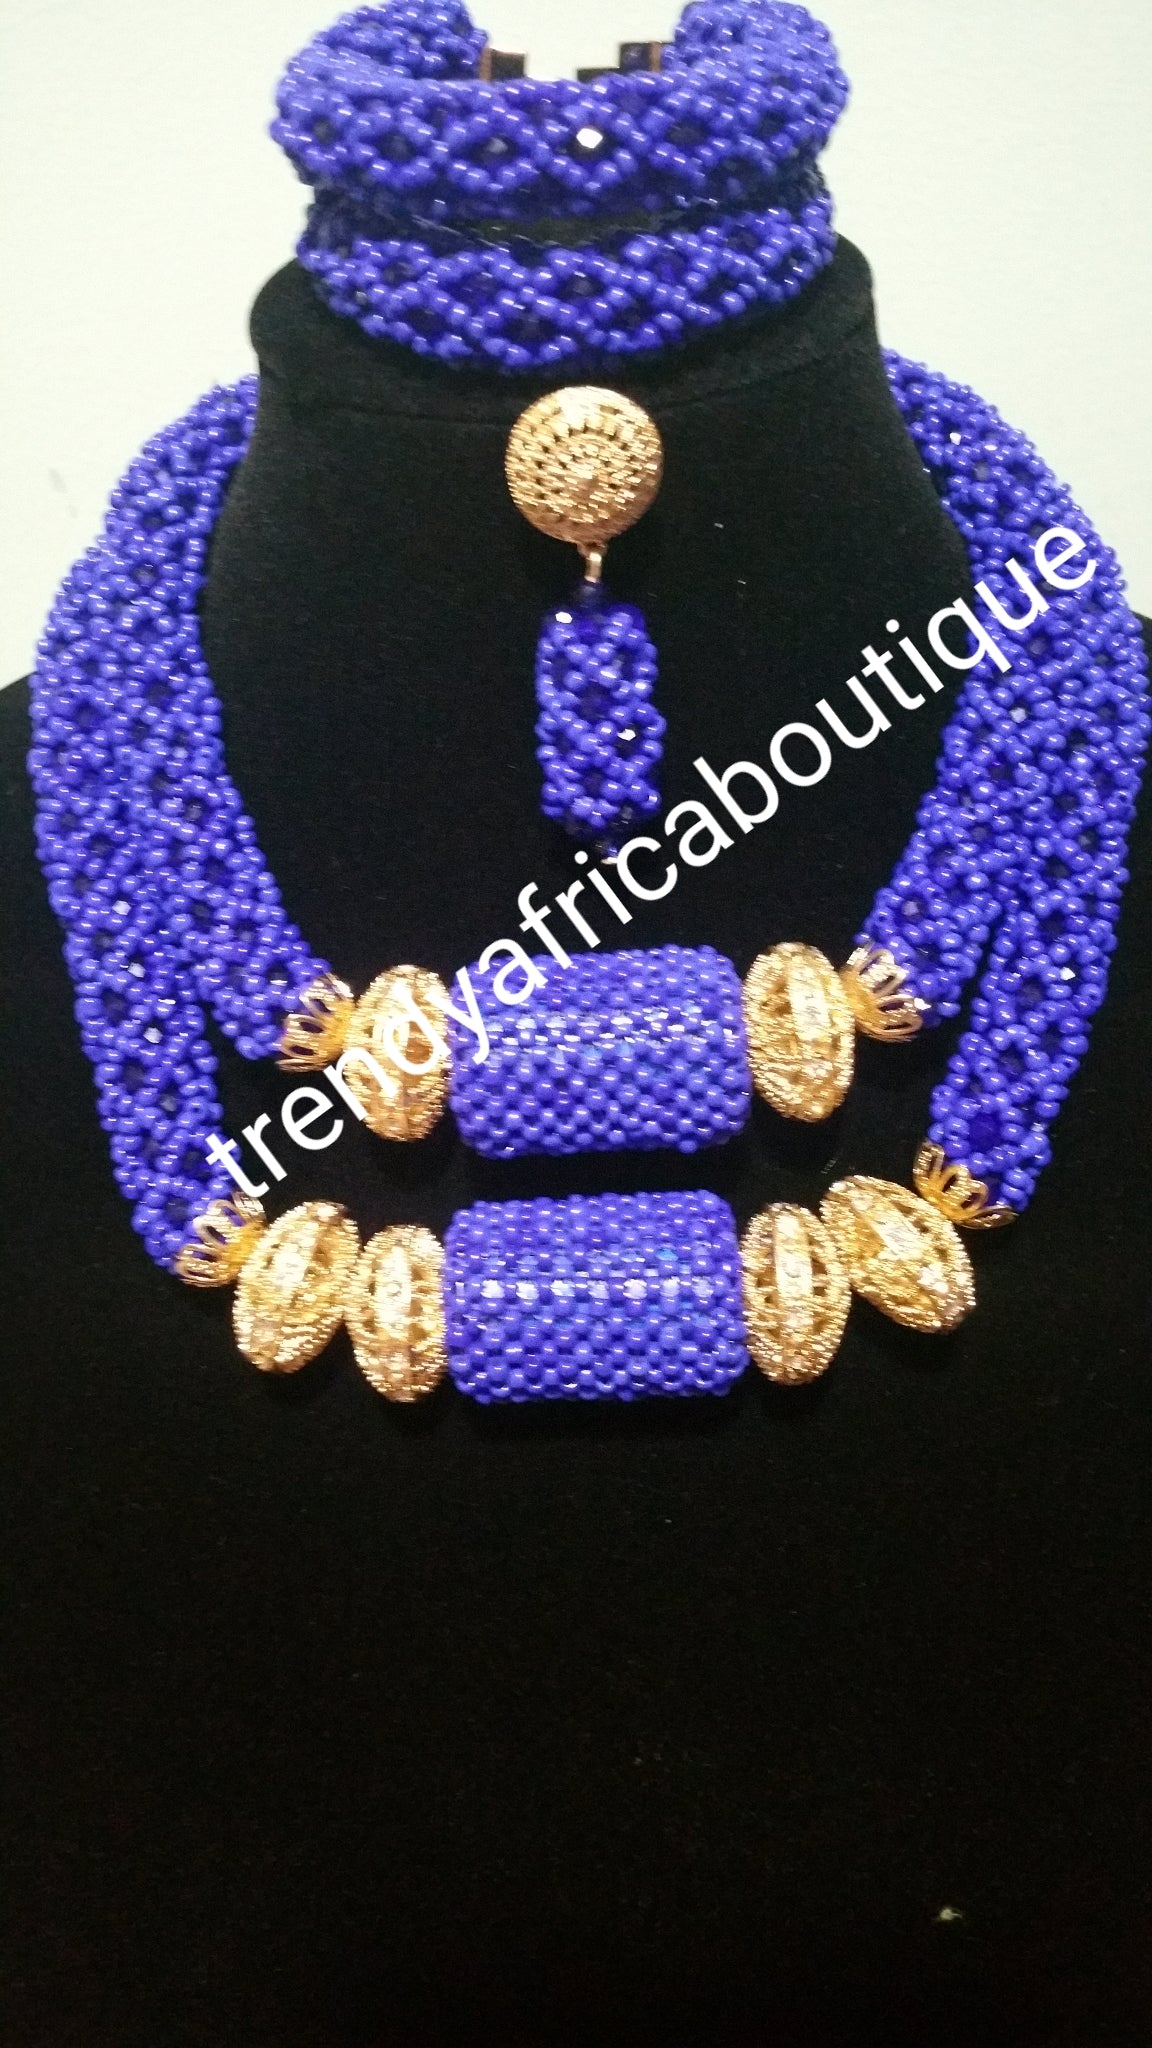 Latest Royal blue coral-necklace set. Quality wedding bead in 2 row choker necklace set.